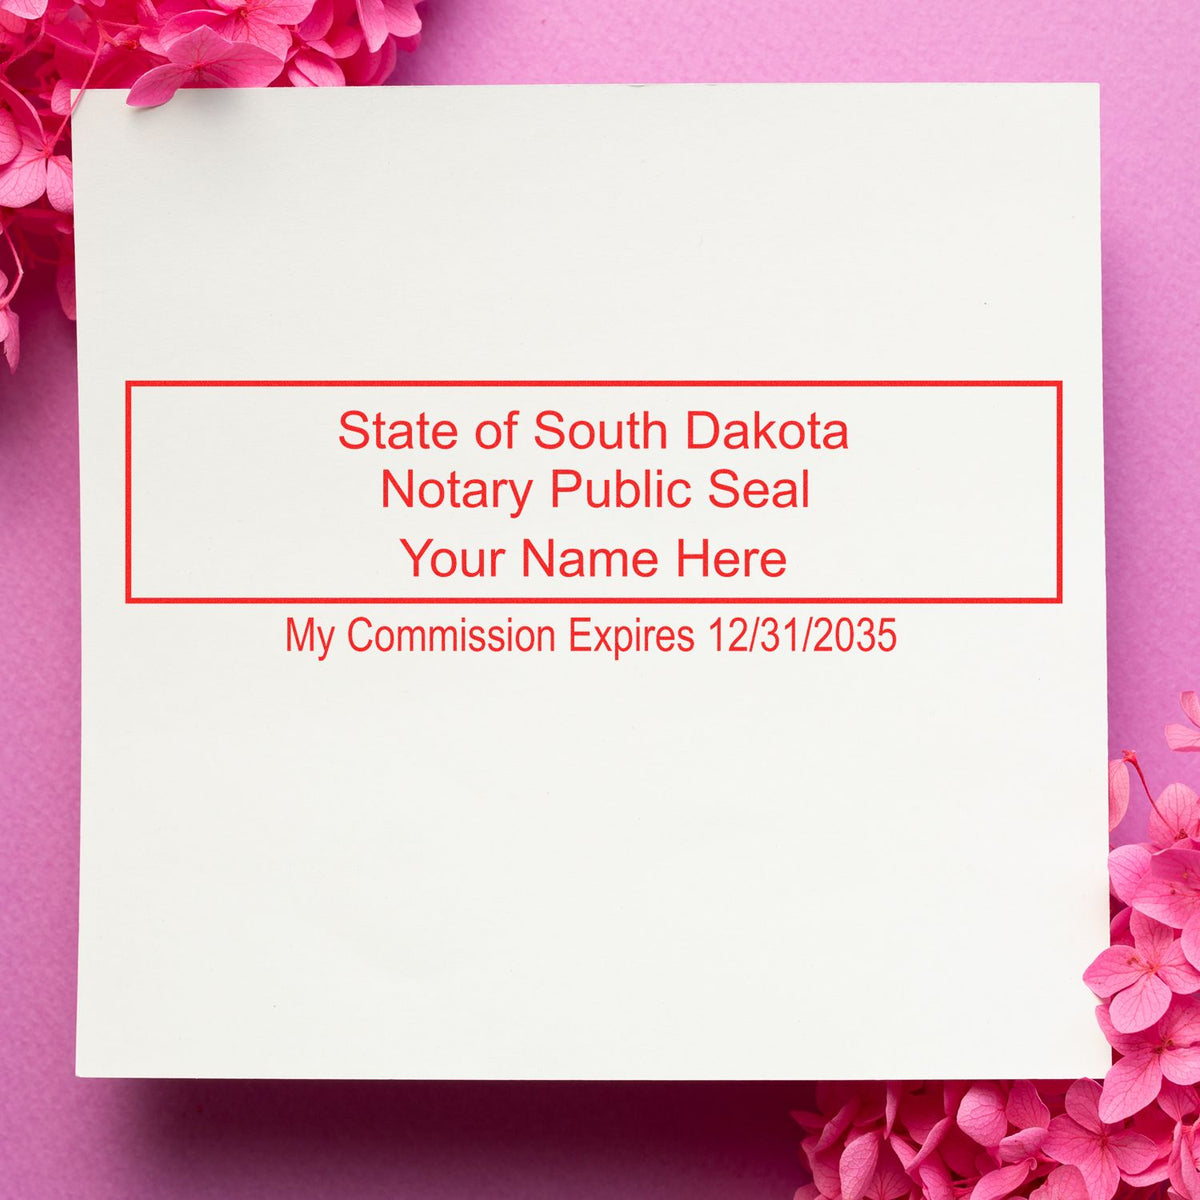 An alternative view of the Slim Pre-Inked Rectangular Notary Stamp for South Dakota stamped on a sheet of paper showing the image in use